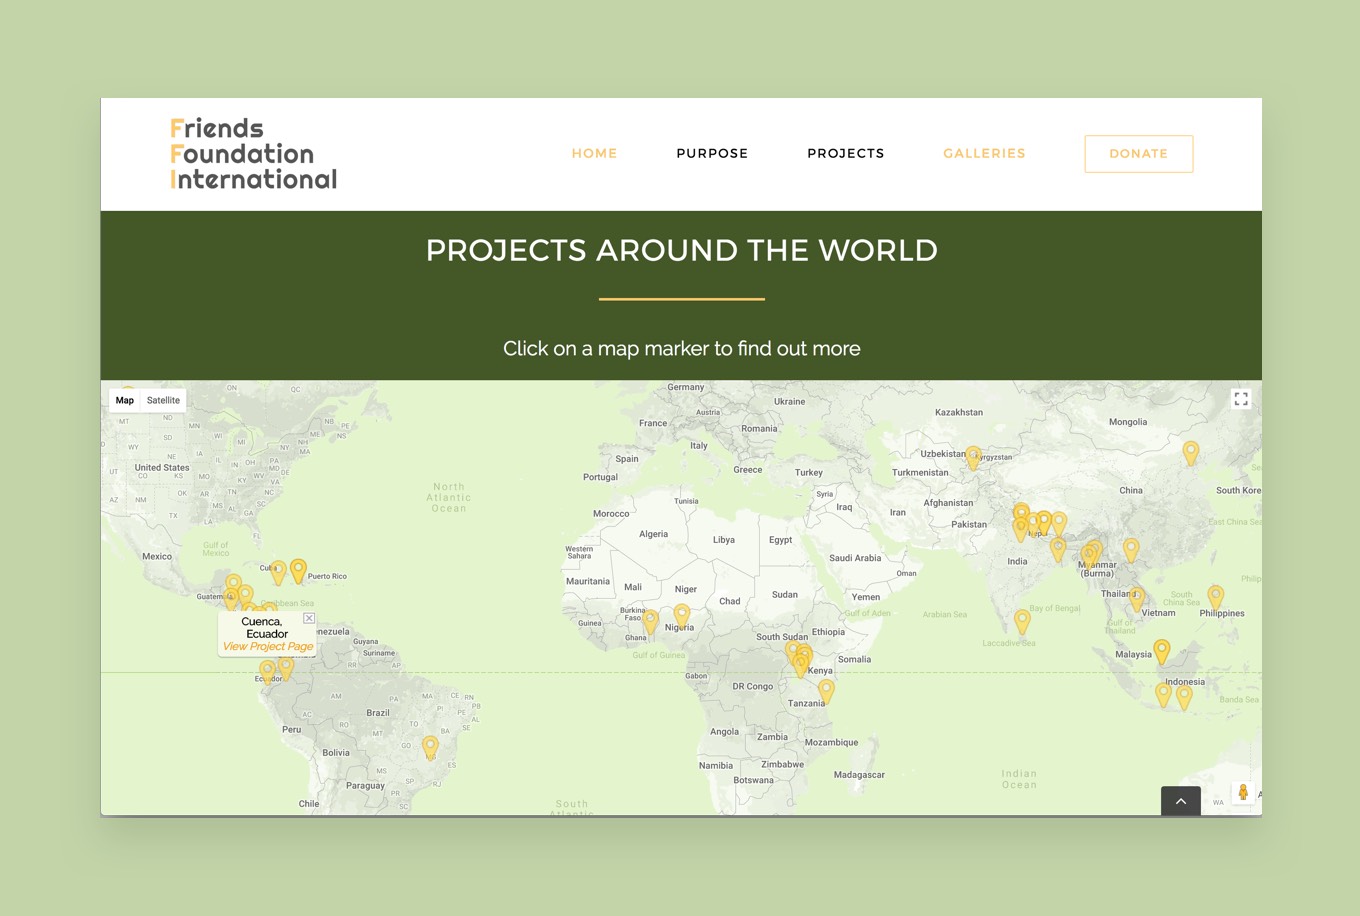 Screenshot of the map section of the Friends Fondation International website homepage